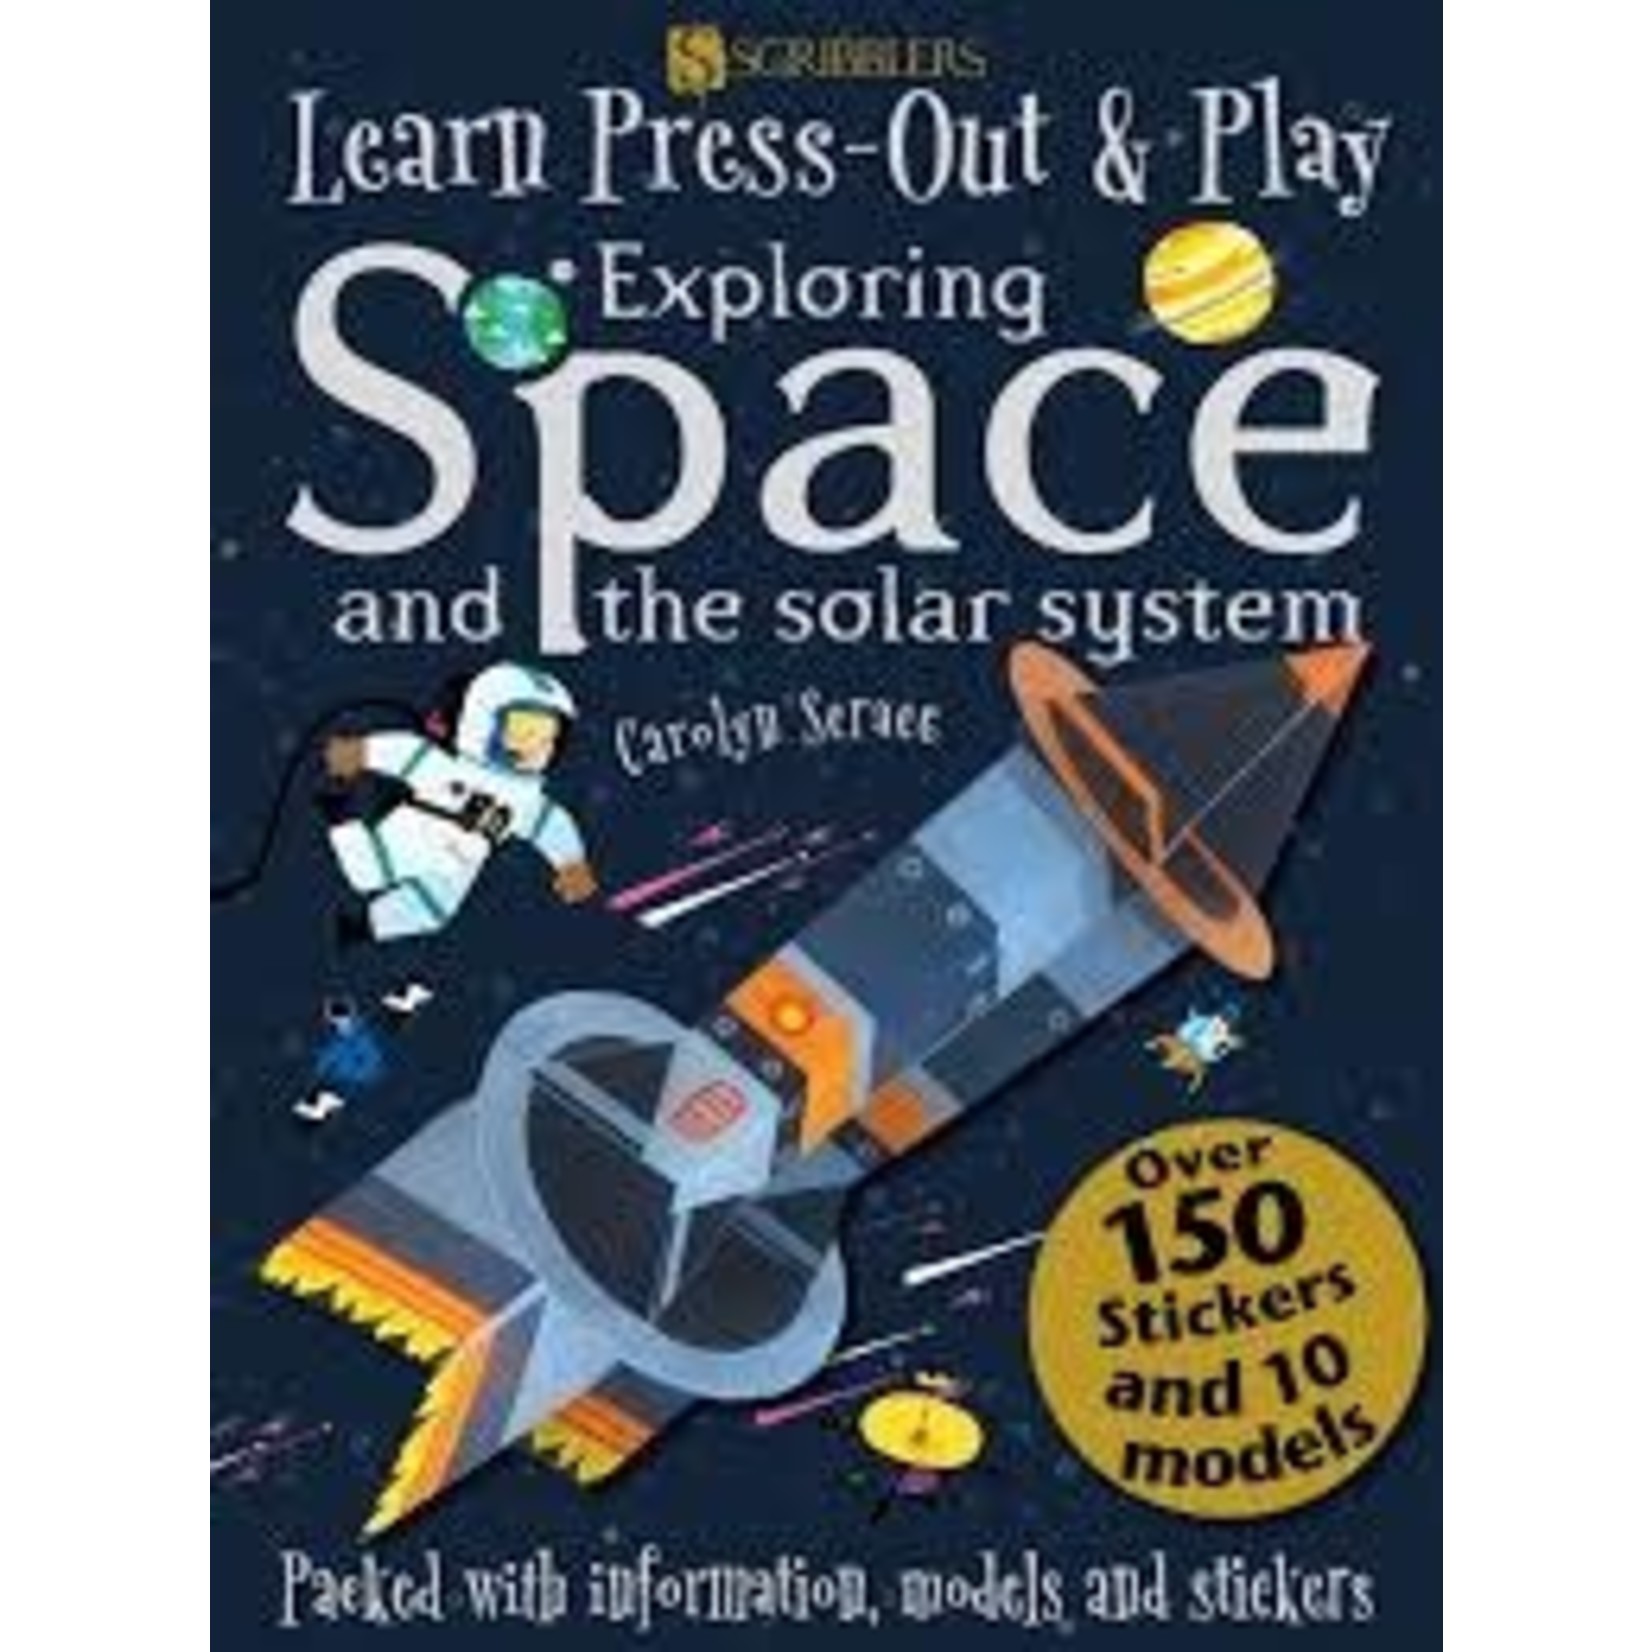 Aviation and Space Exploring Space and the Solar System